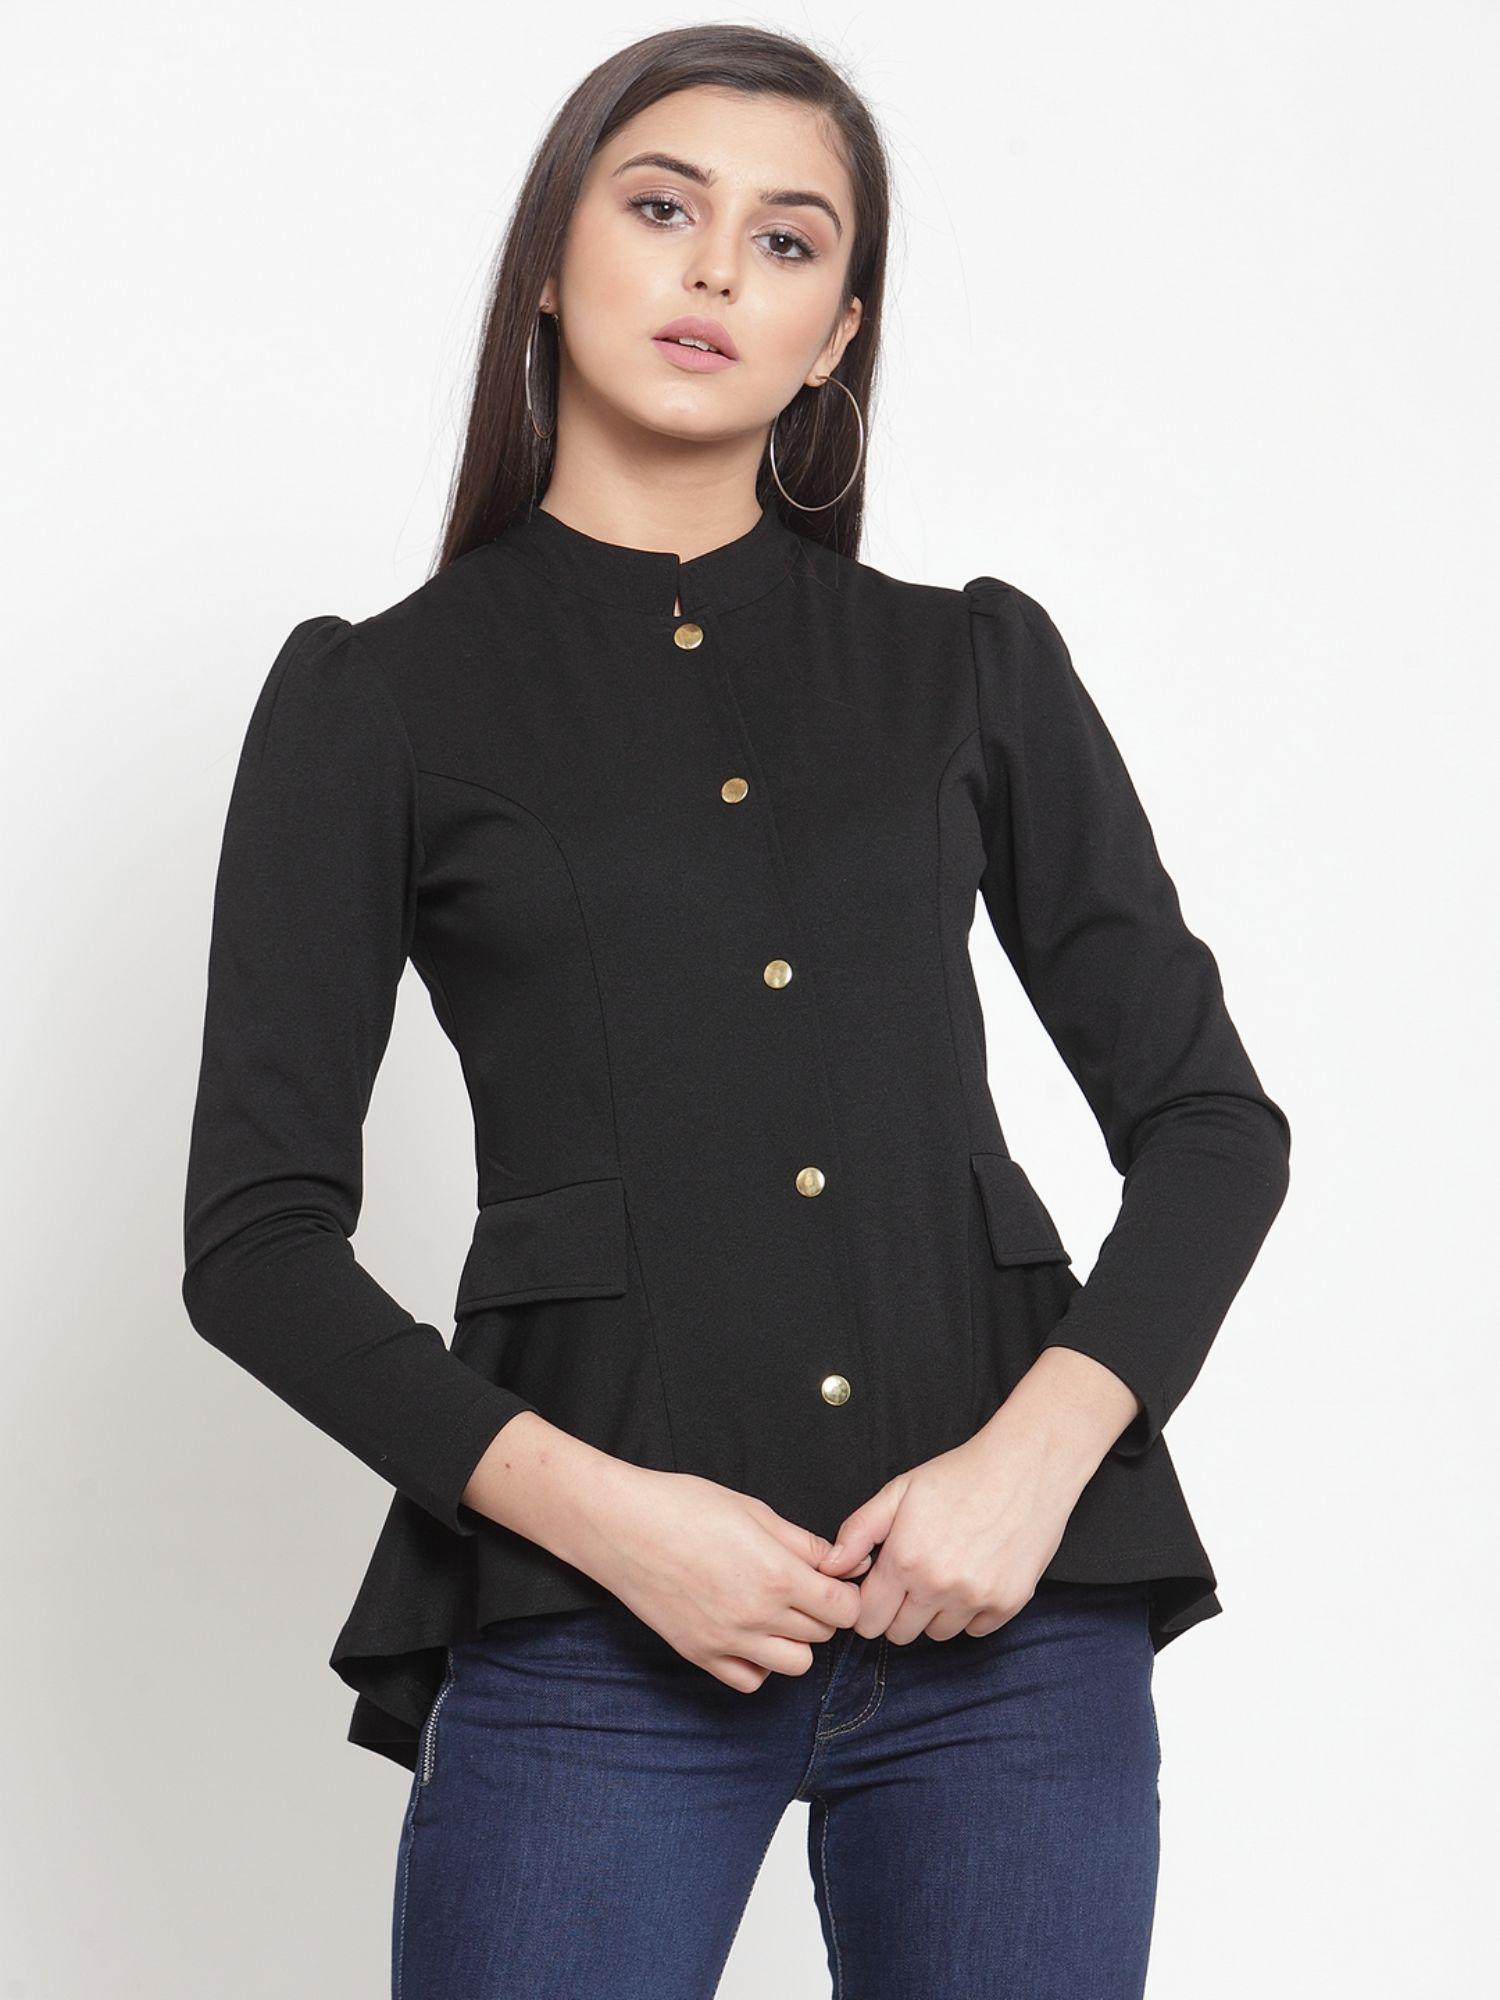 women black solid tailored jacket